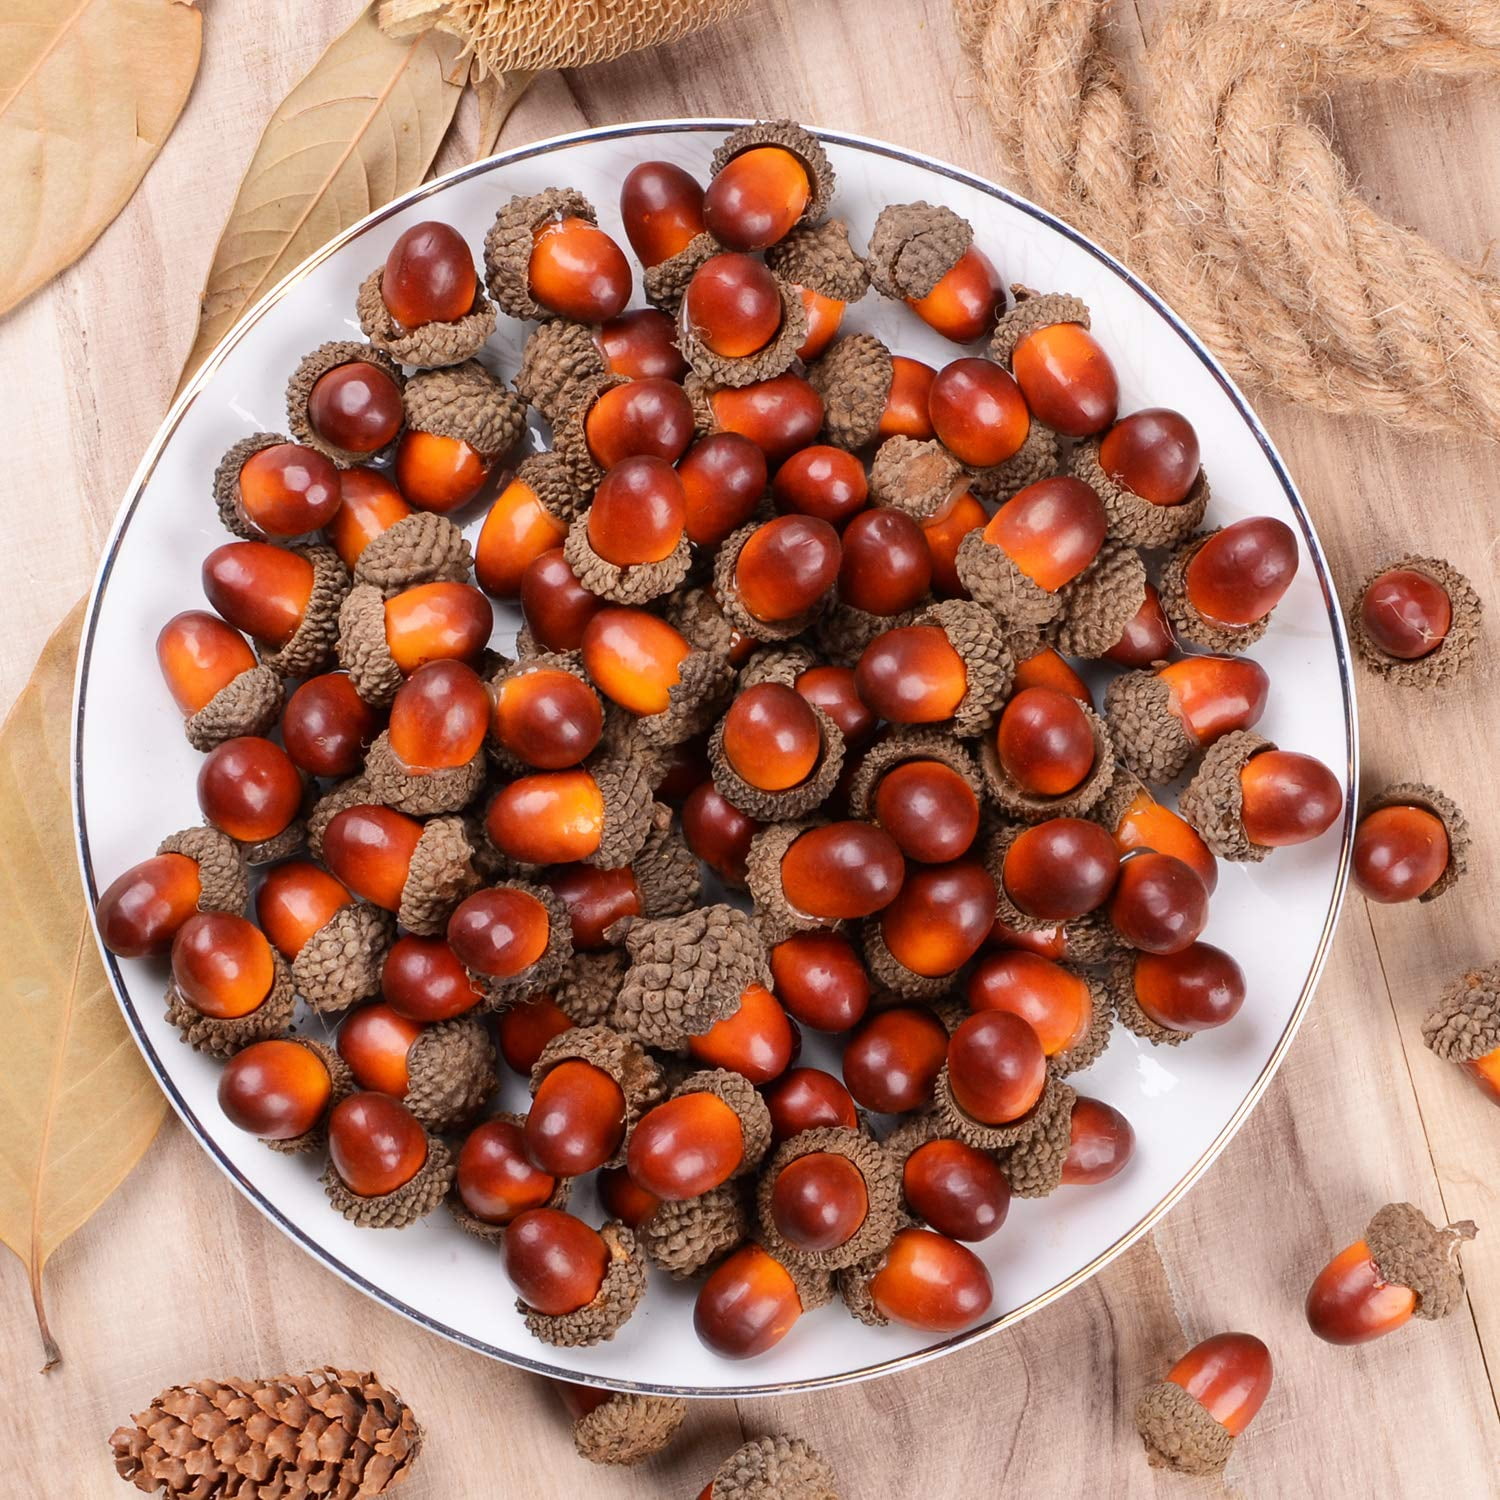 Yarssir 100 Pieces Craft Acorns Artificial Acorn Decor Fake Fruit Props Acorns Decoration Crafting DIY Home Party Wedding Decor Thanksgiving Christmas Festival Dark Brown-100 Pack 2 Colors